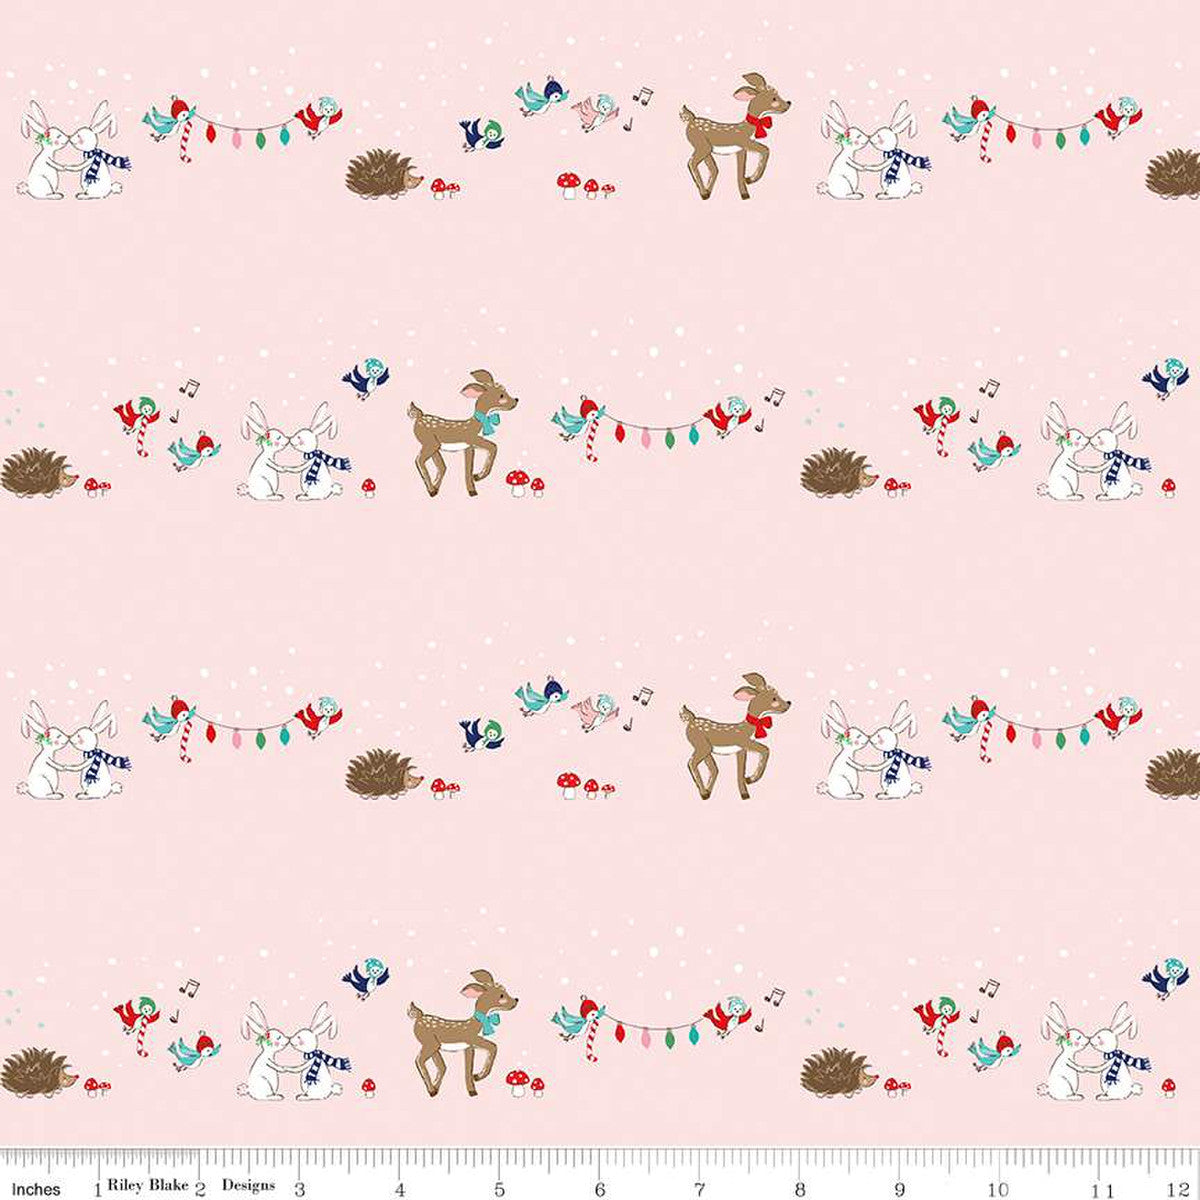 Manufacturer: Riley Blake Designs Designer: Tasha Noel Collection: Pixie Noel 2 Print Name: Animals in Pink Material: 100% Cotton  Weight: Quilting  SKU: C12111-PINK Width: 44 inches